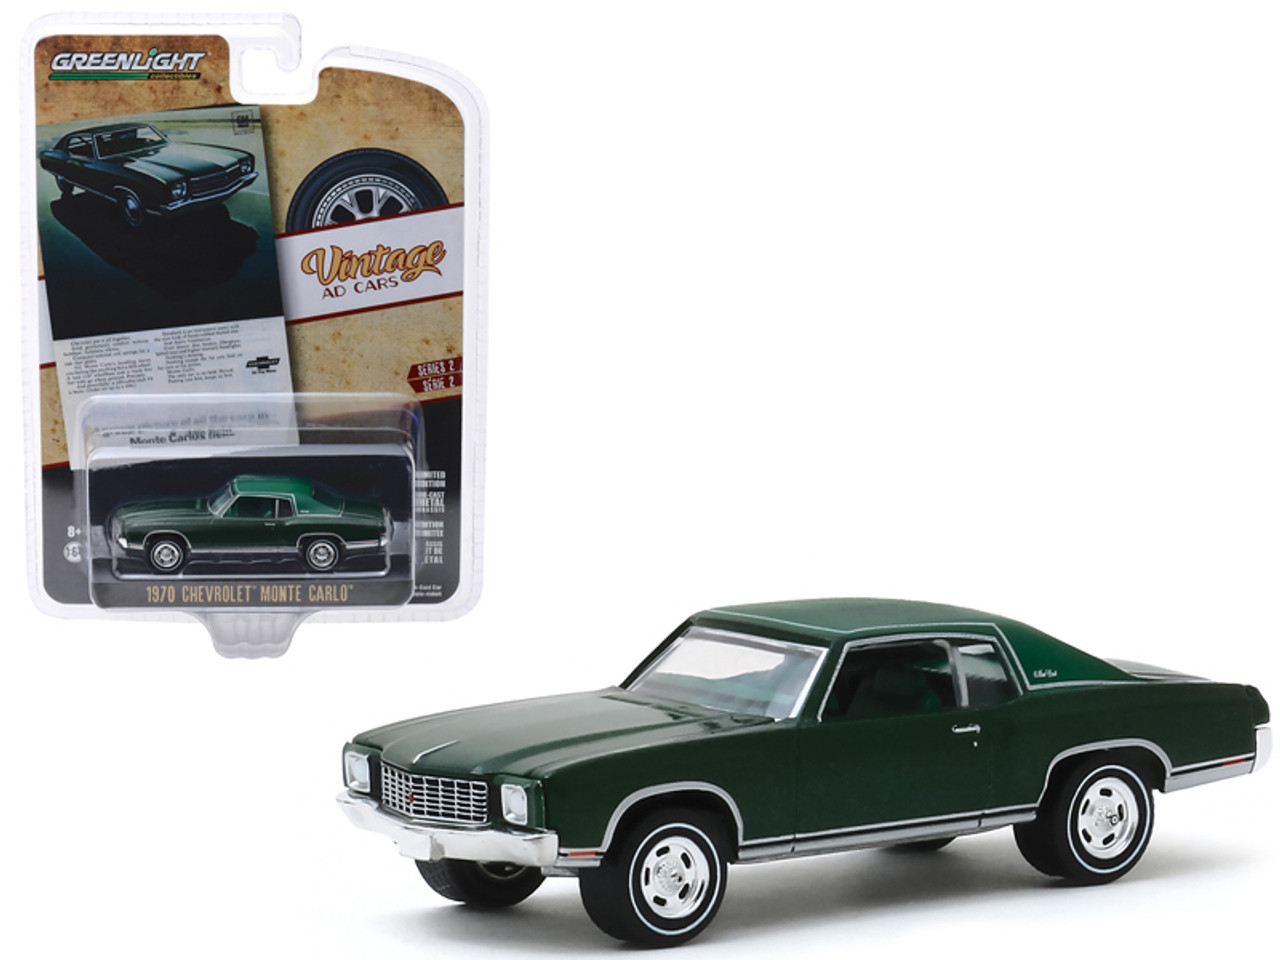 1970 Chevrolet Monte Carlo Dark Green with Light Green Top "A Group Picture of all the Cars in Monte Carlo's Field" "Vintage Ad Cars" Series 2 1/64 Diecast Model Car by Greenlight